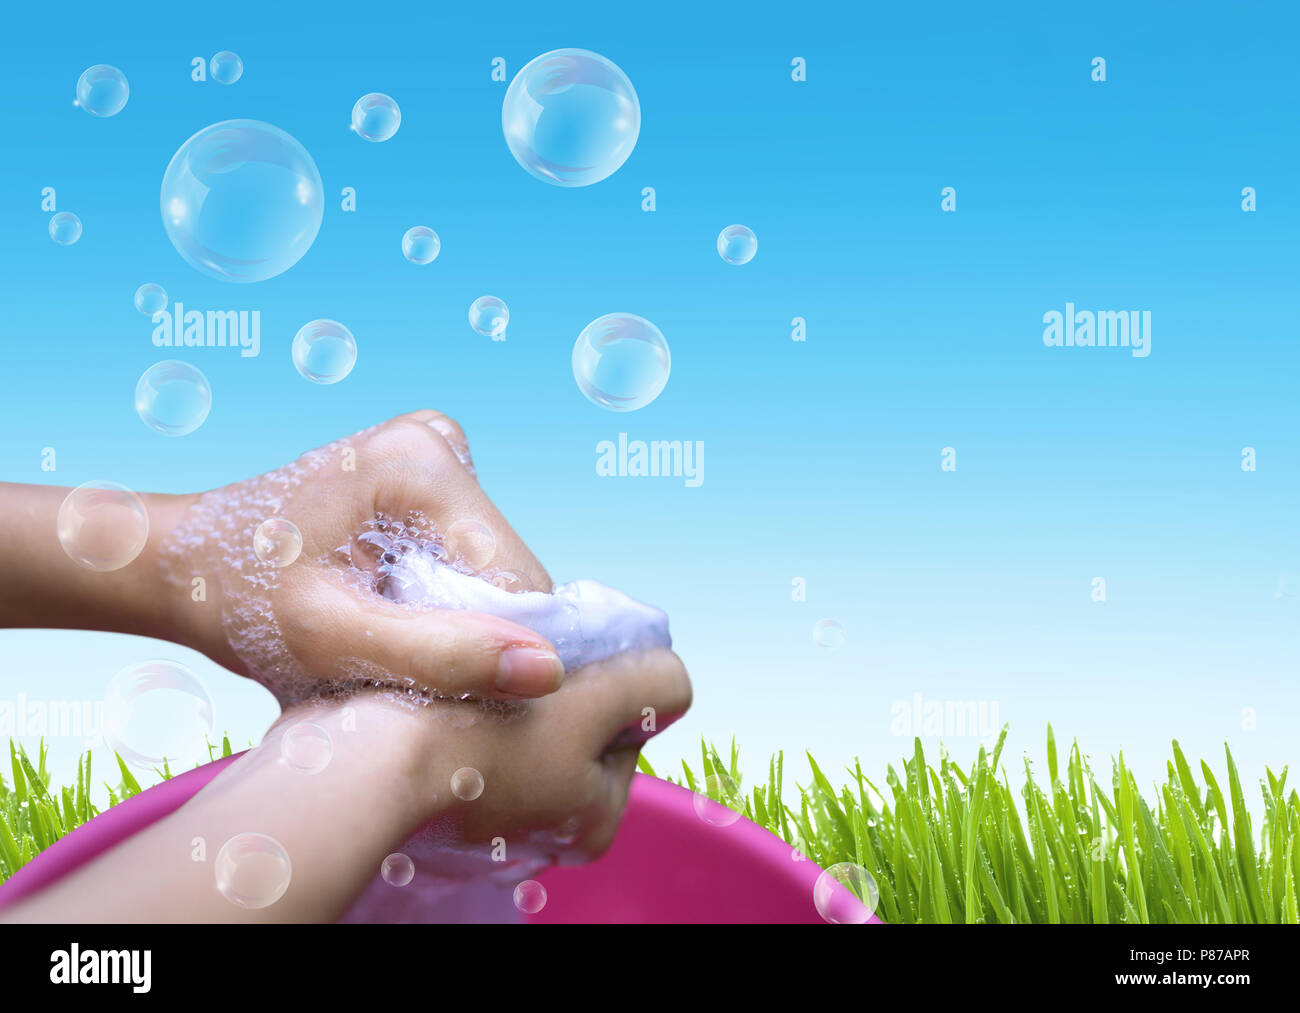 https://c8.alamy.com/comp/P87APR/female-hand-washing-clothes-in-the-pink-basin-with-clear-bubble-soap-against-blue-sky-P87APR.jpg